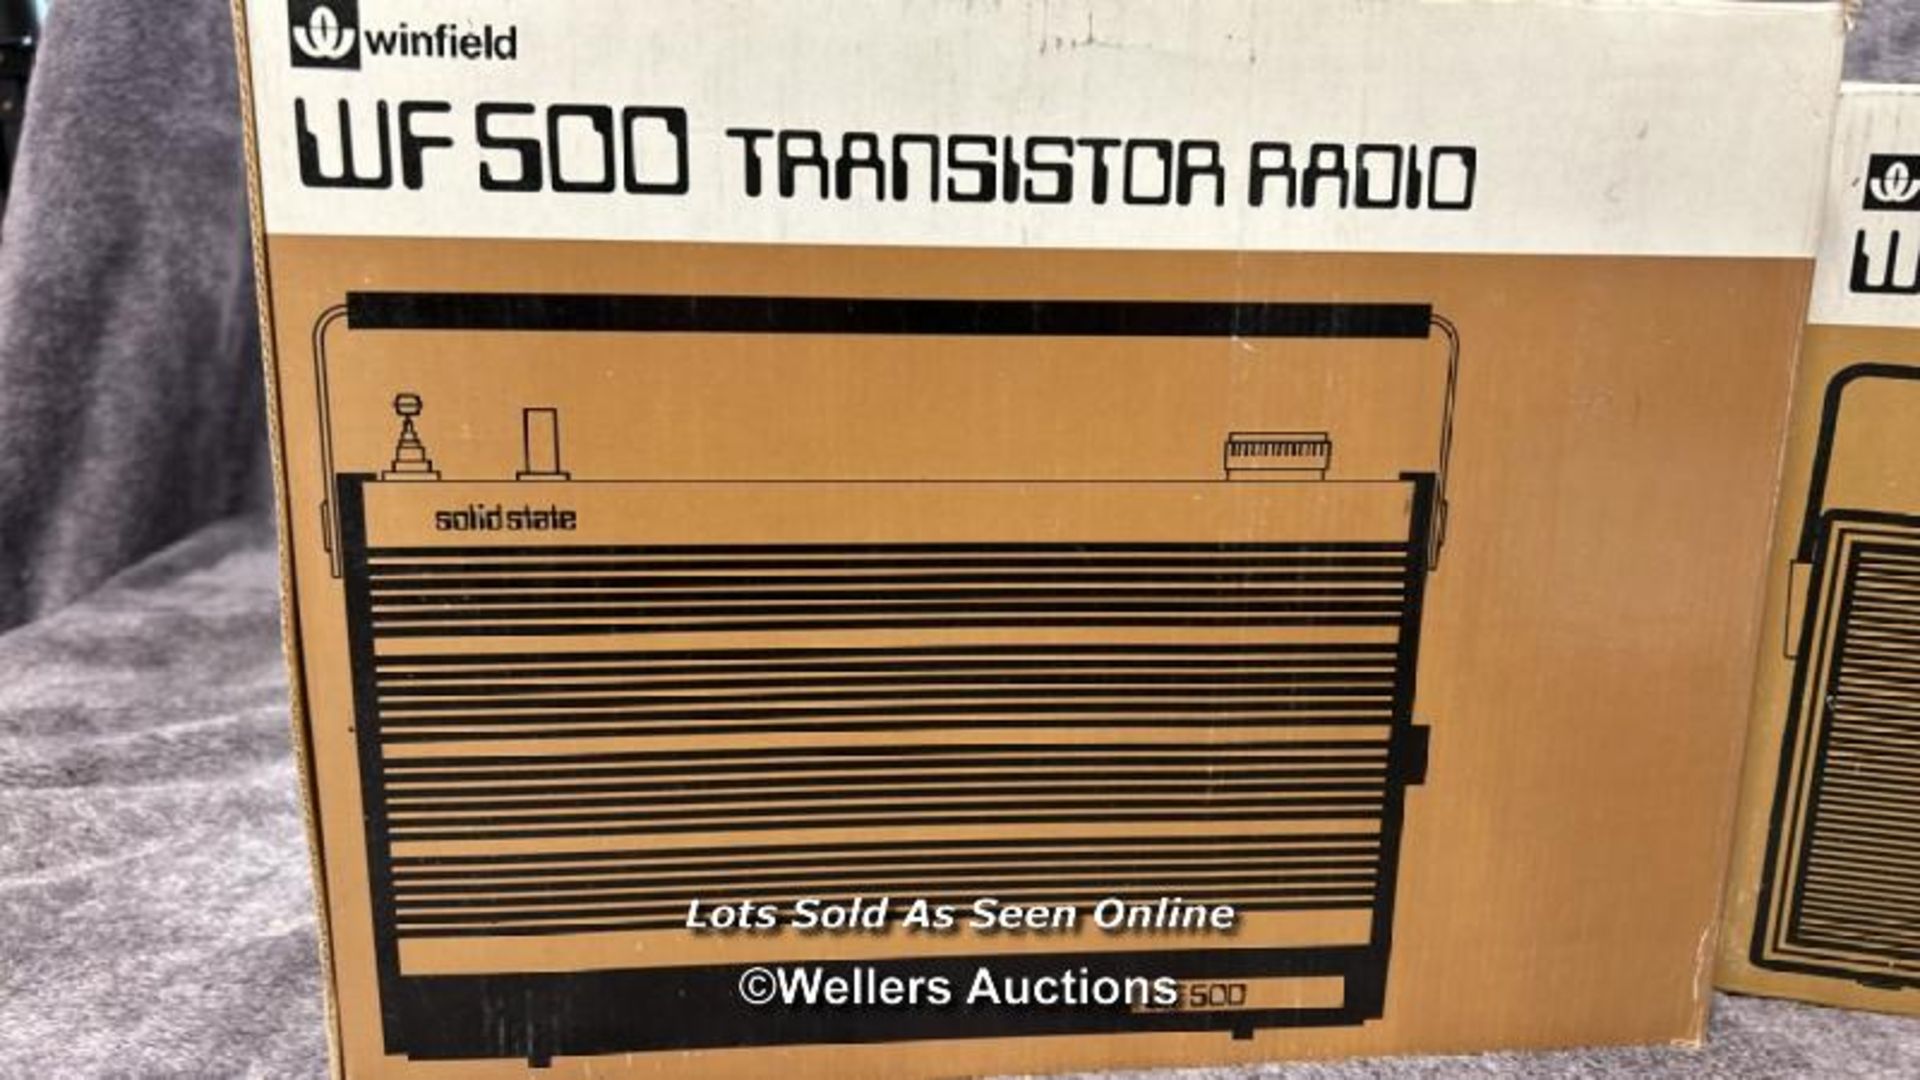 Four boxed vintage Winfield transister radios and cassette recorder, from the private collection - Image 3 of 5